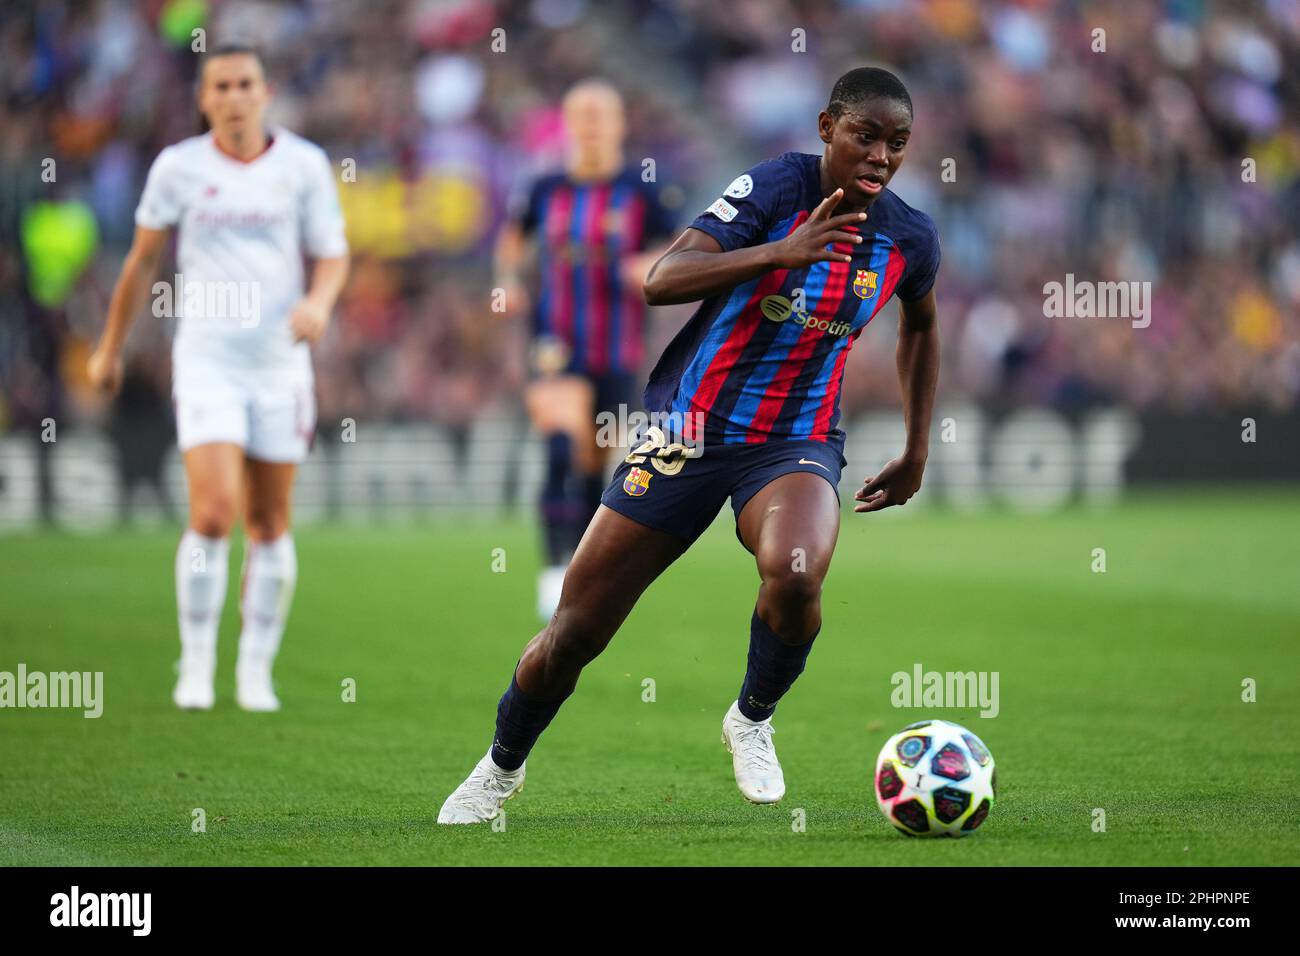 Asista Oshoala of FC Barcelona during the UEFA Womens Champions League match, Quarter-Finals, 2nd leg between FC Barcelona and v AS Roma played at Spotify Camp Nou Stadium on March 29, 2023 in Barcelona, Spain. (Photo by Colas Buera / PRESSIN) Stock Photo